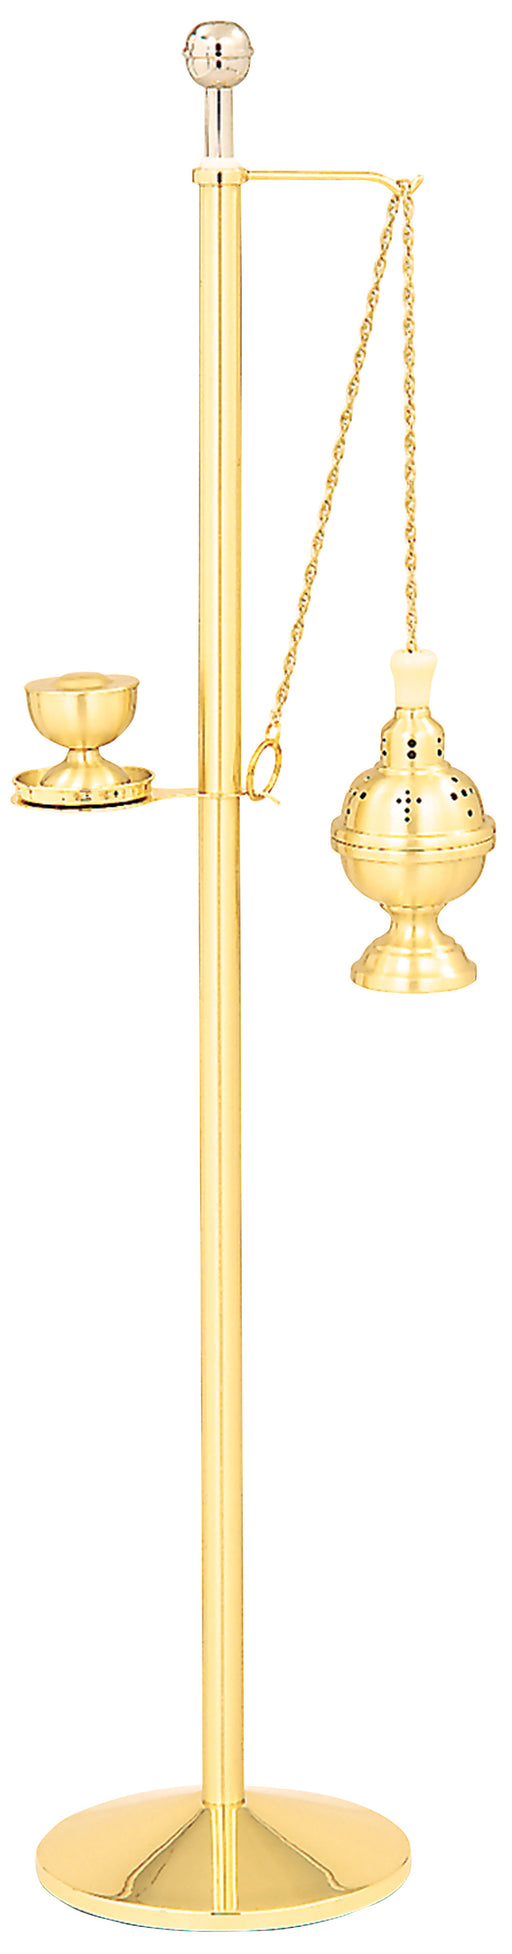 Censer Stand with Stainless Steel Holy Water Sprinkler